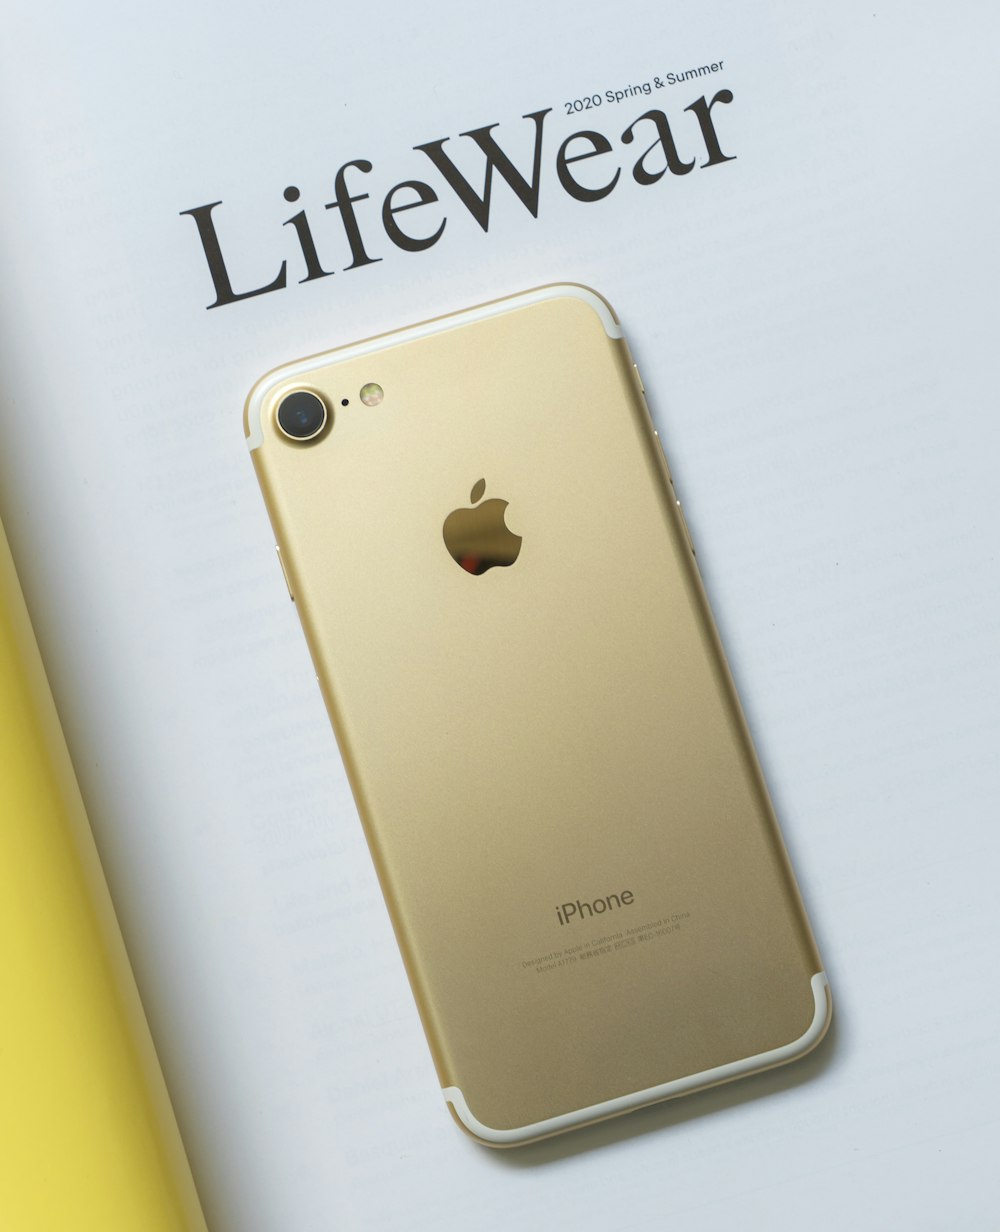 gold iphone 6 on white surface